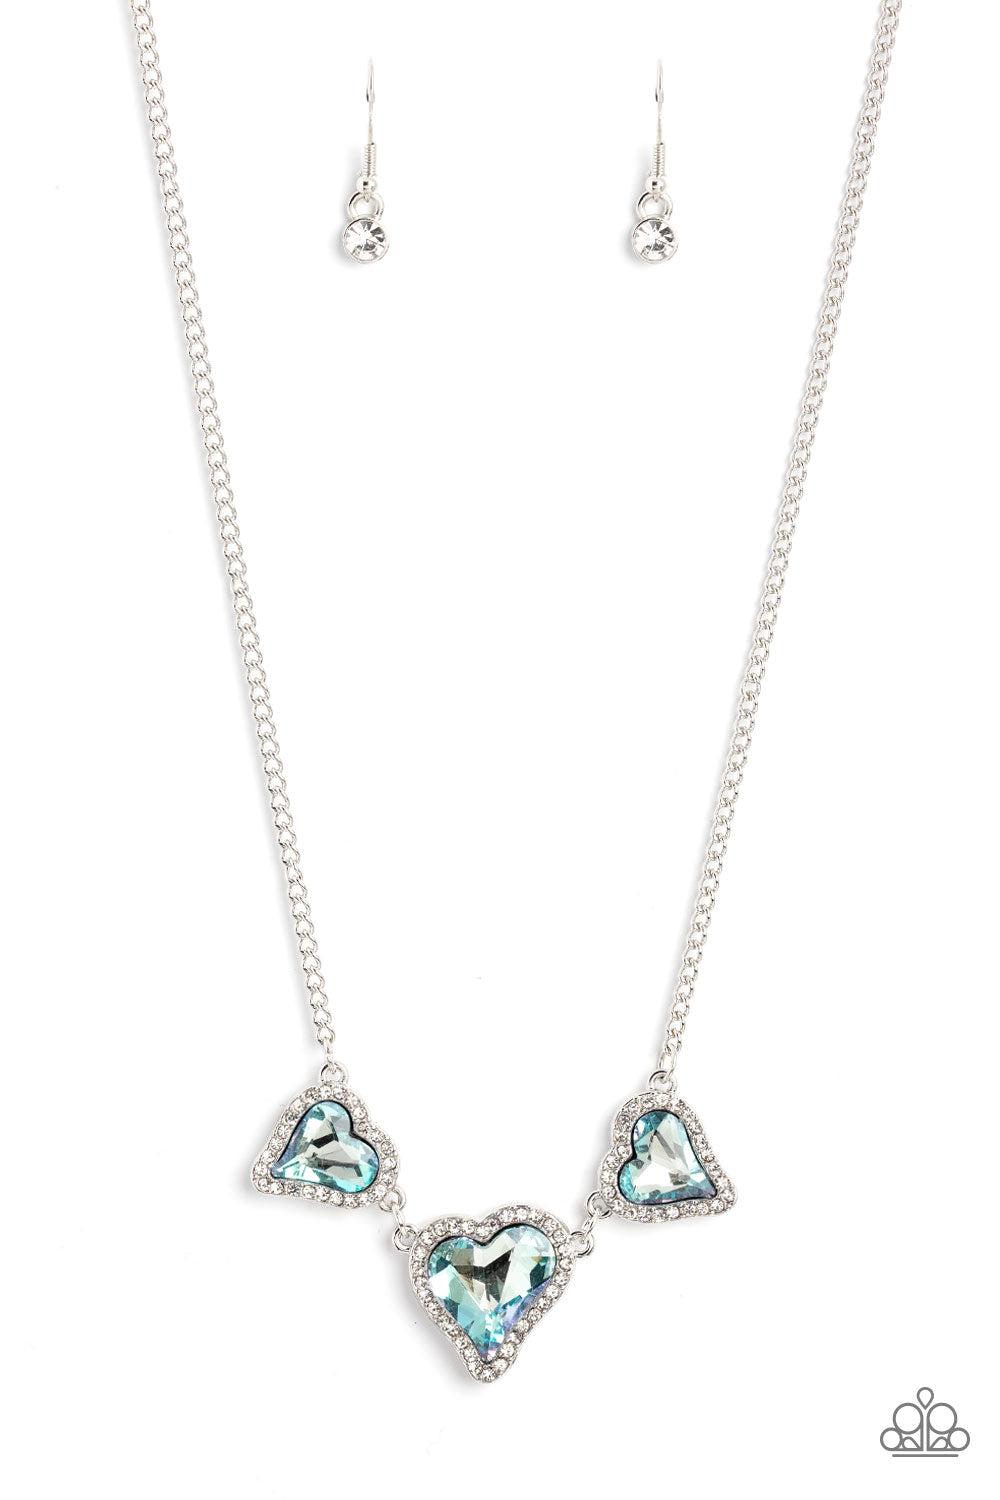 State of the HEART Blue Rhinestone Heart Necklace - Paparazzi Accessories- lightbox - CarasShop.com - $5 Jewelry by Cara Jewels